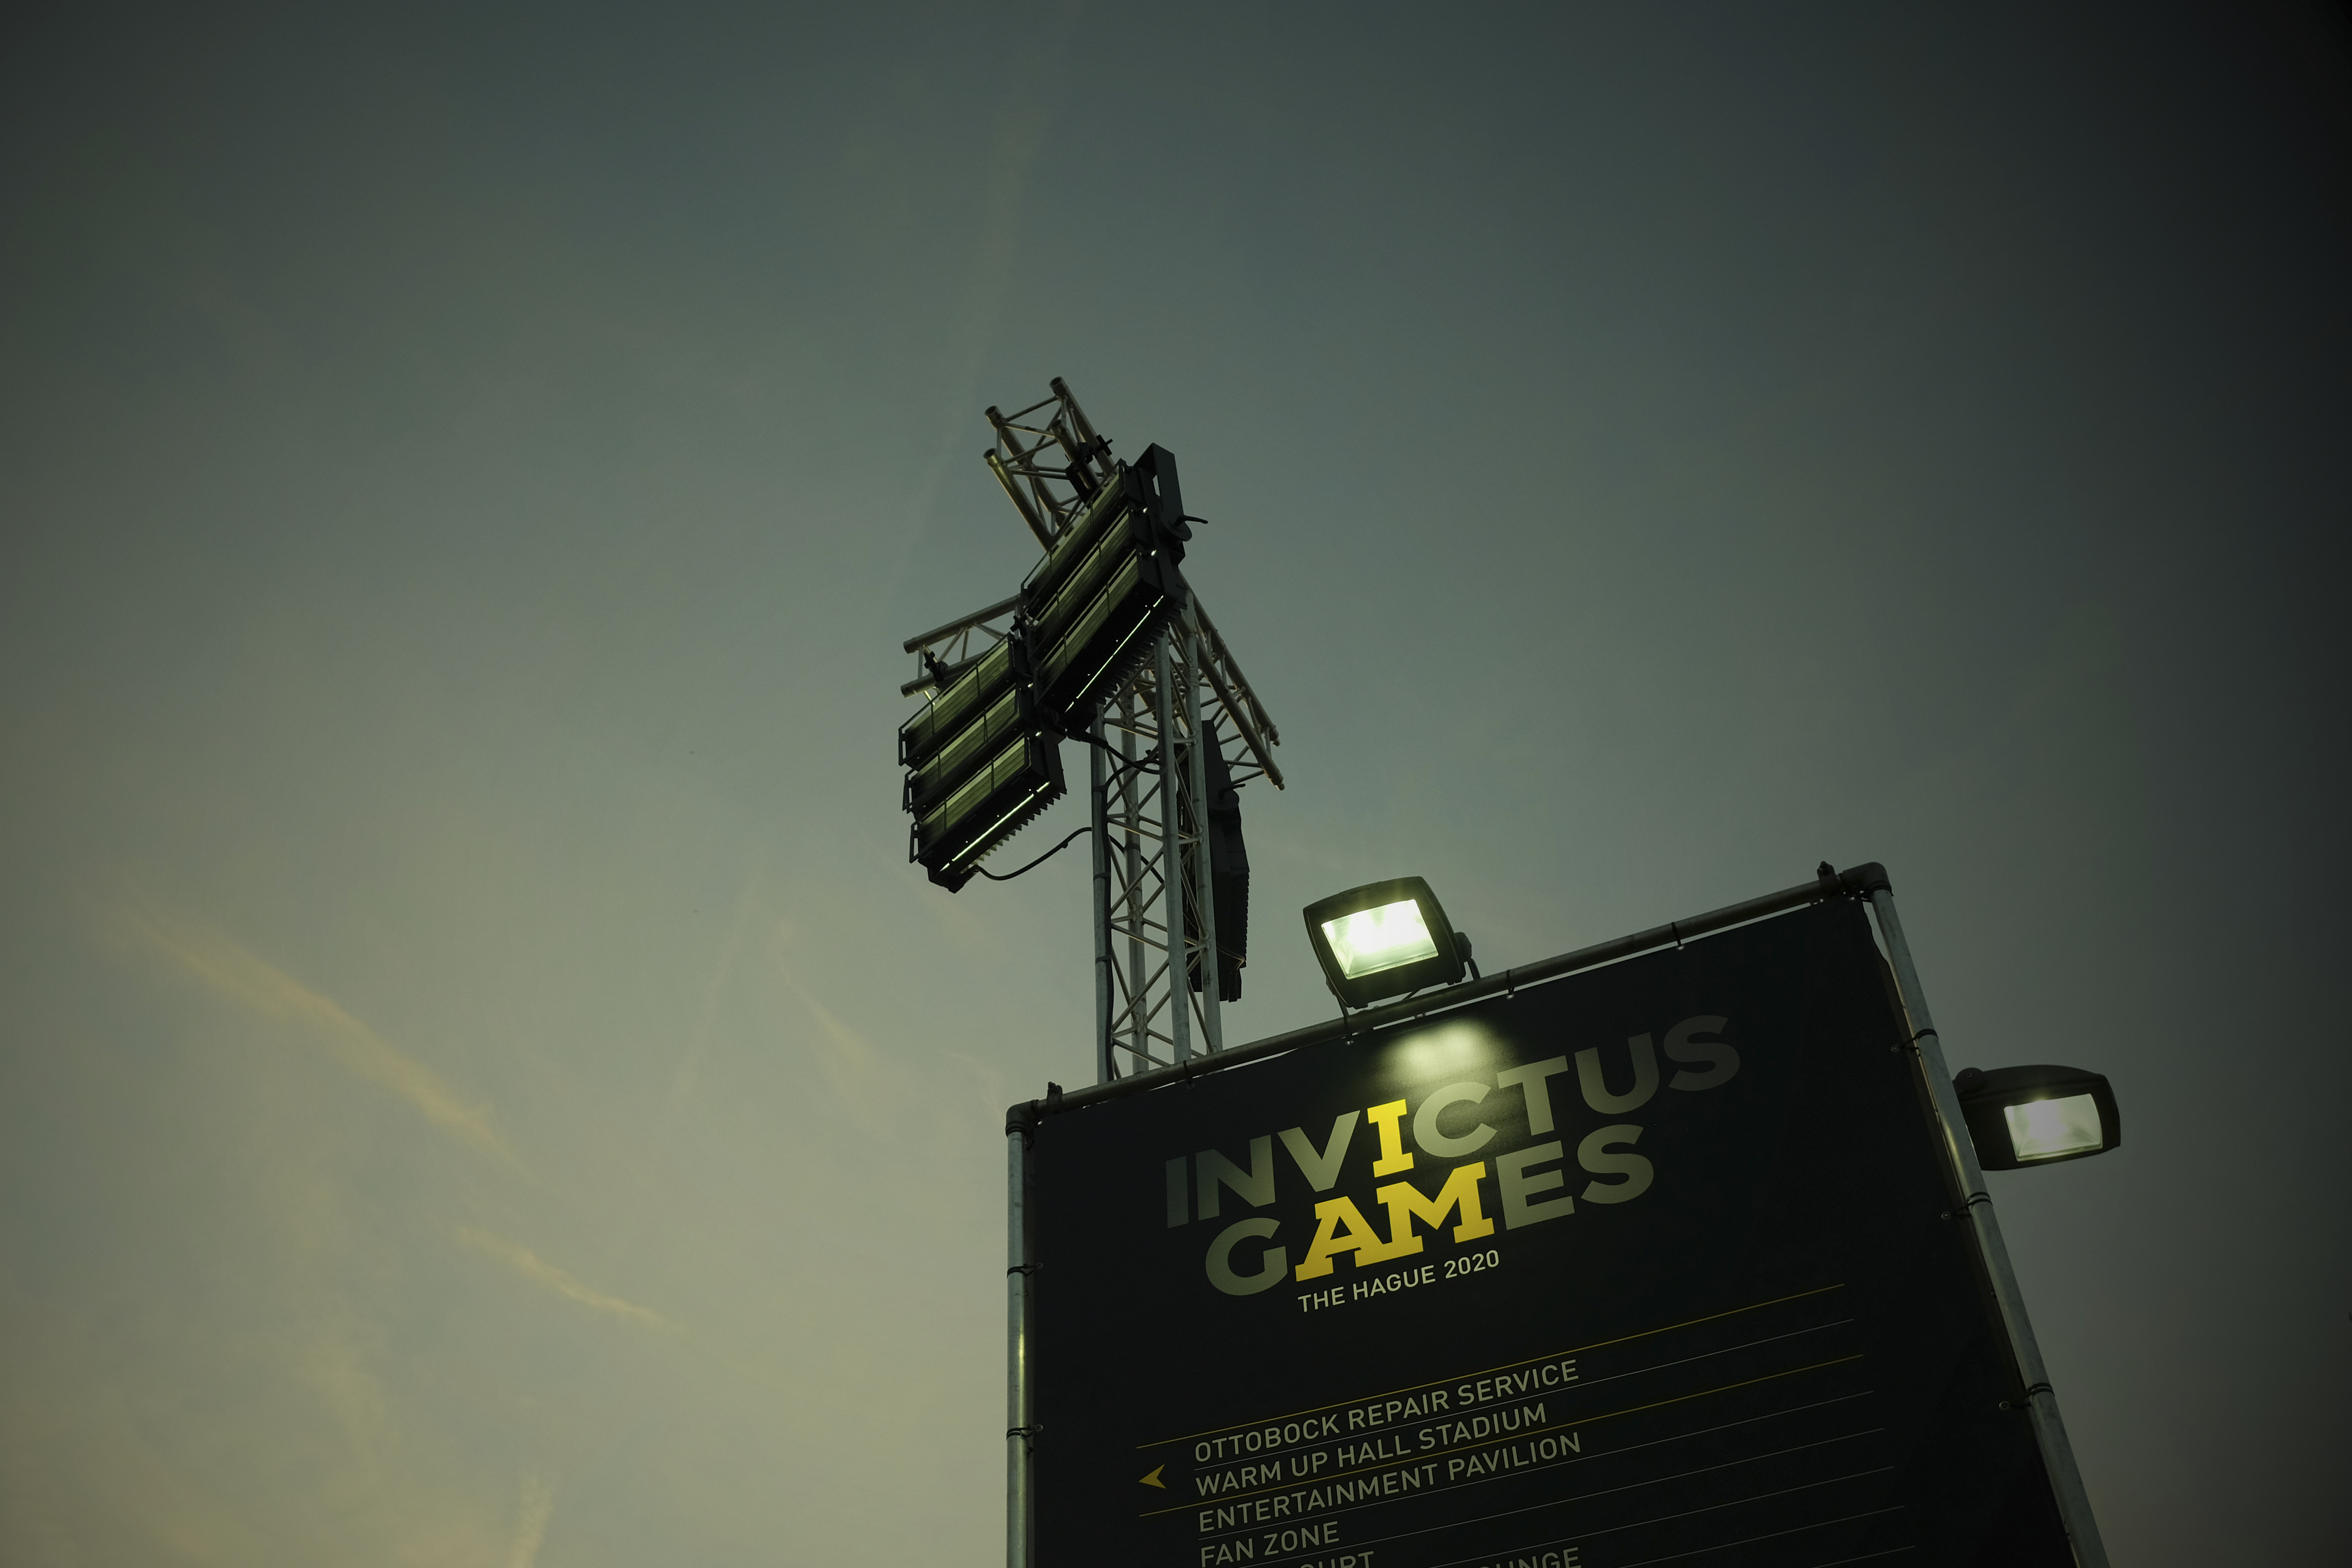 Spotlights highlight advertising stand for the Invictus Games.